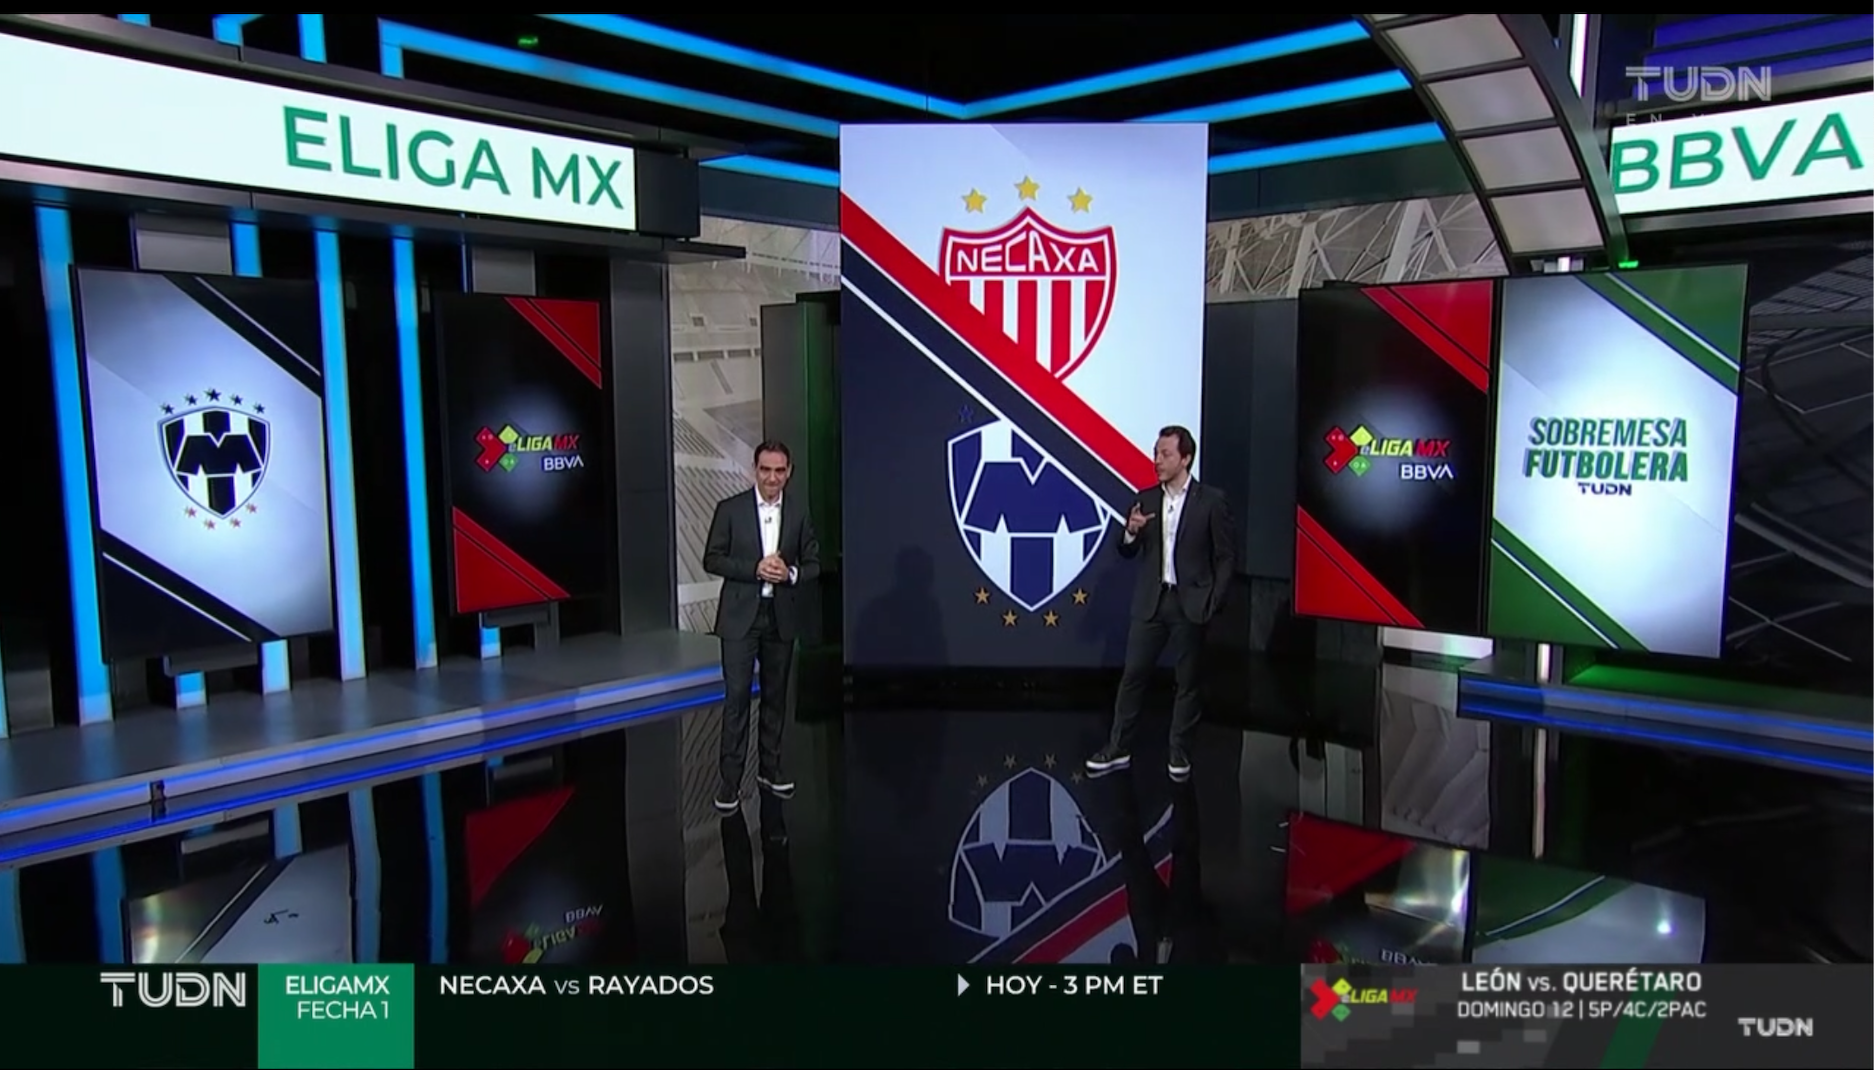 Univision Moves Into Esports With Pro Soccer Players at the Controls